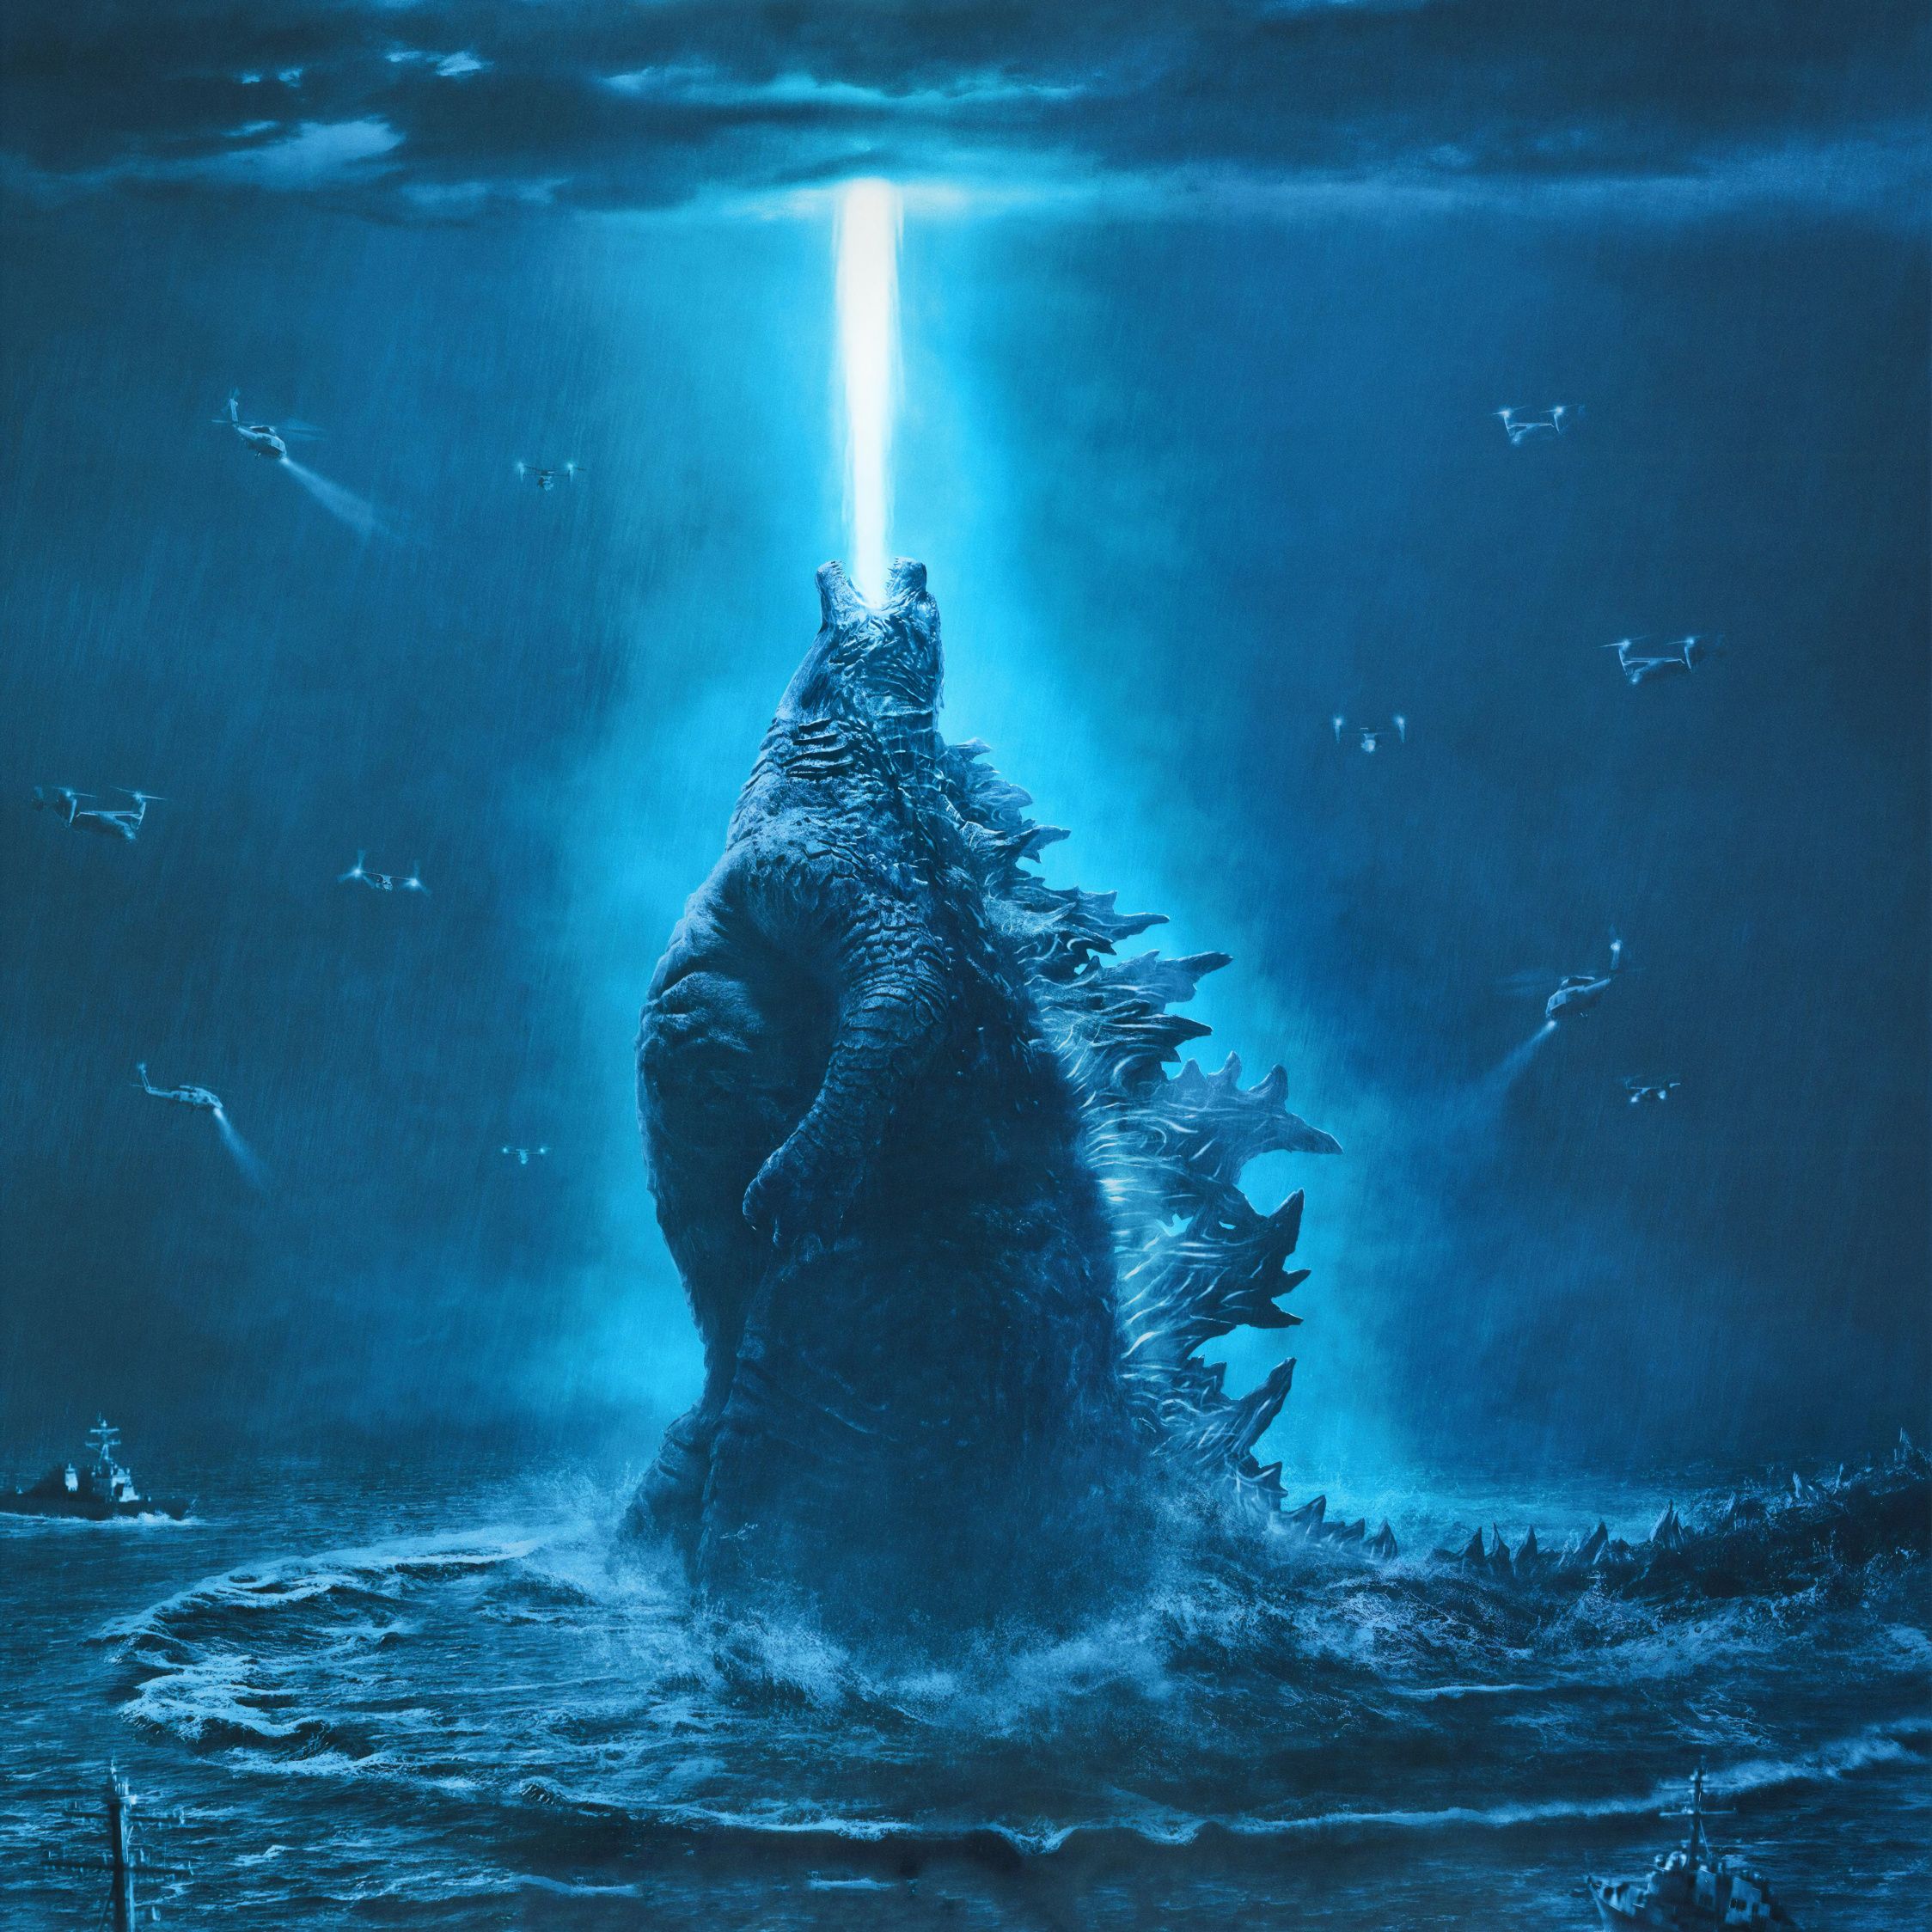 Download Godzilla: King of The Monsters, 2019 movie wallpaper, 2248x iPad Air, iPad Air iPad iPad iPad mini iPad mini 3